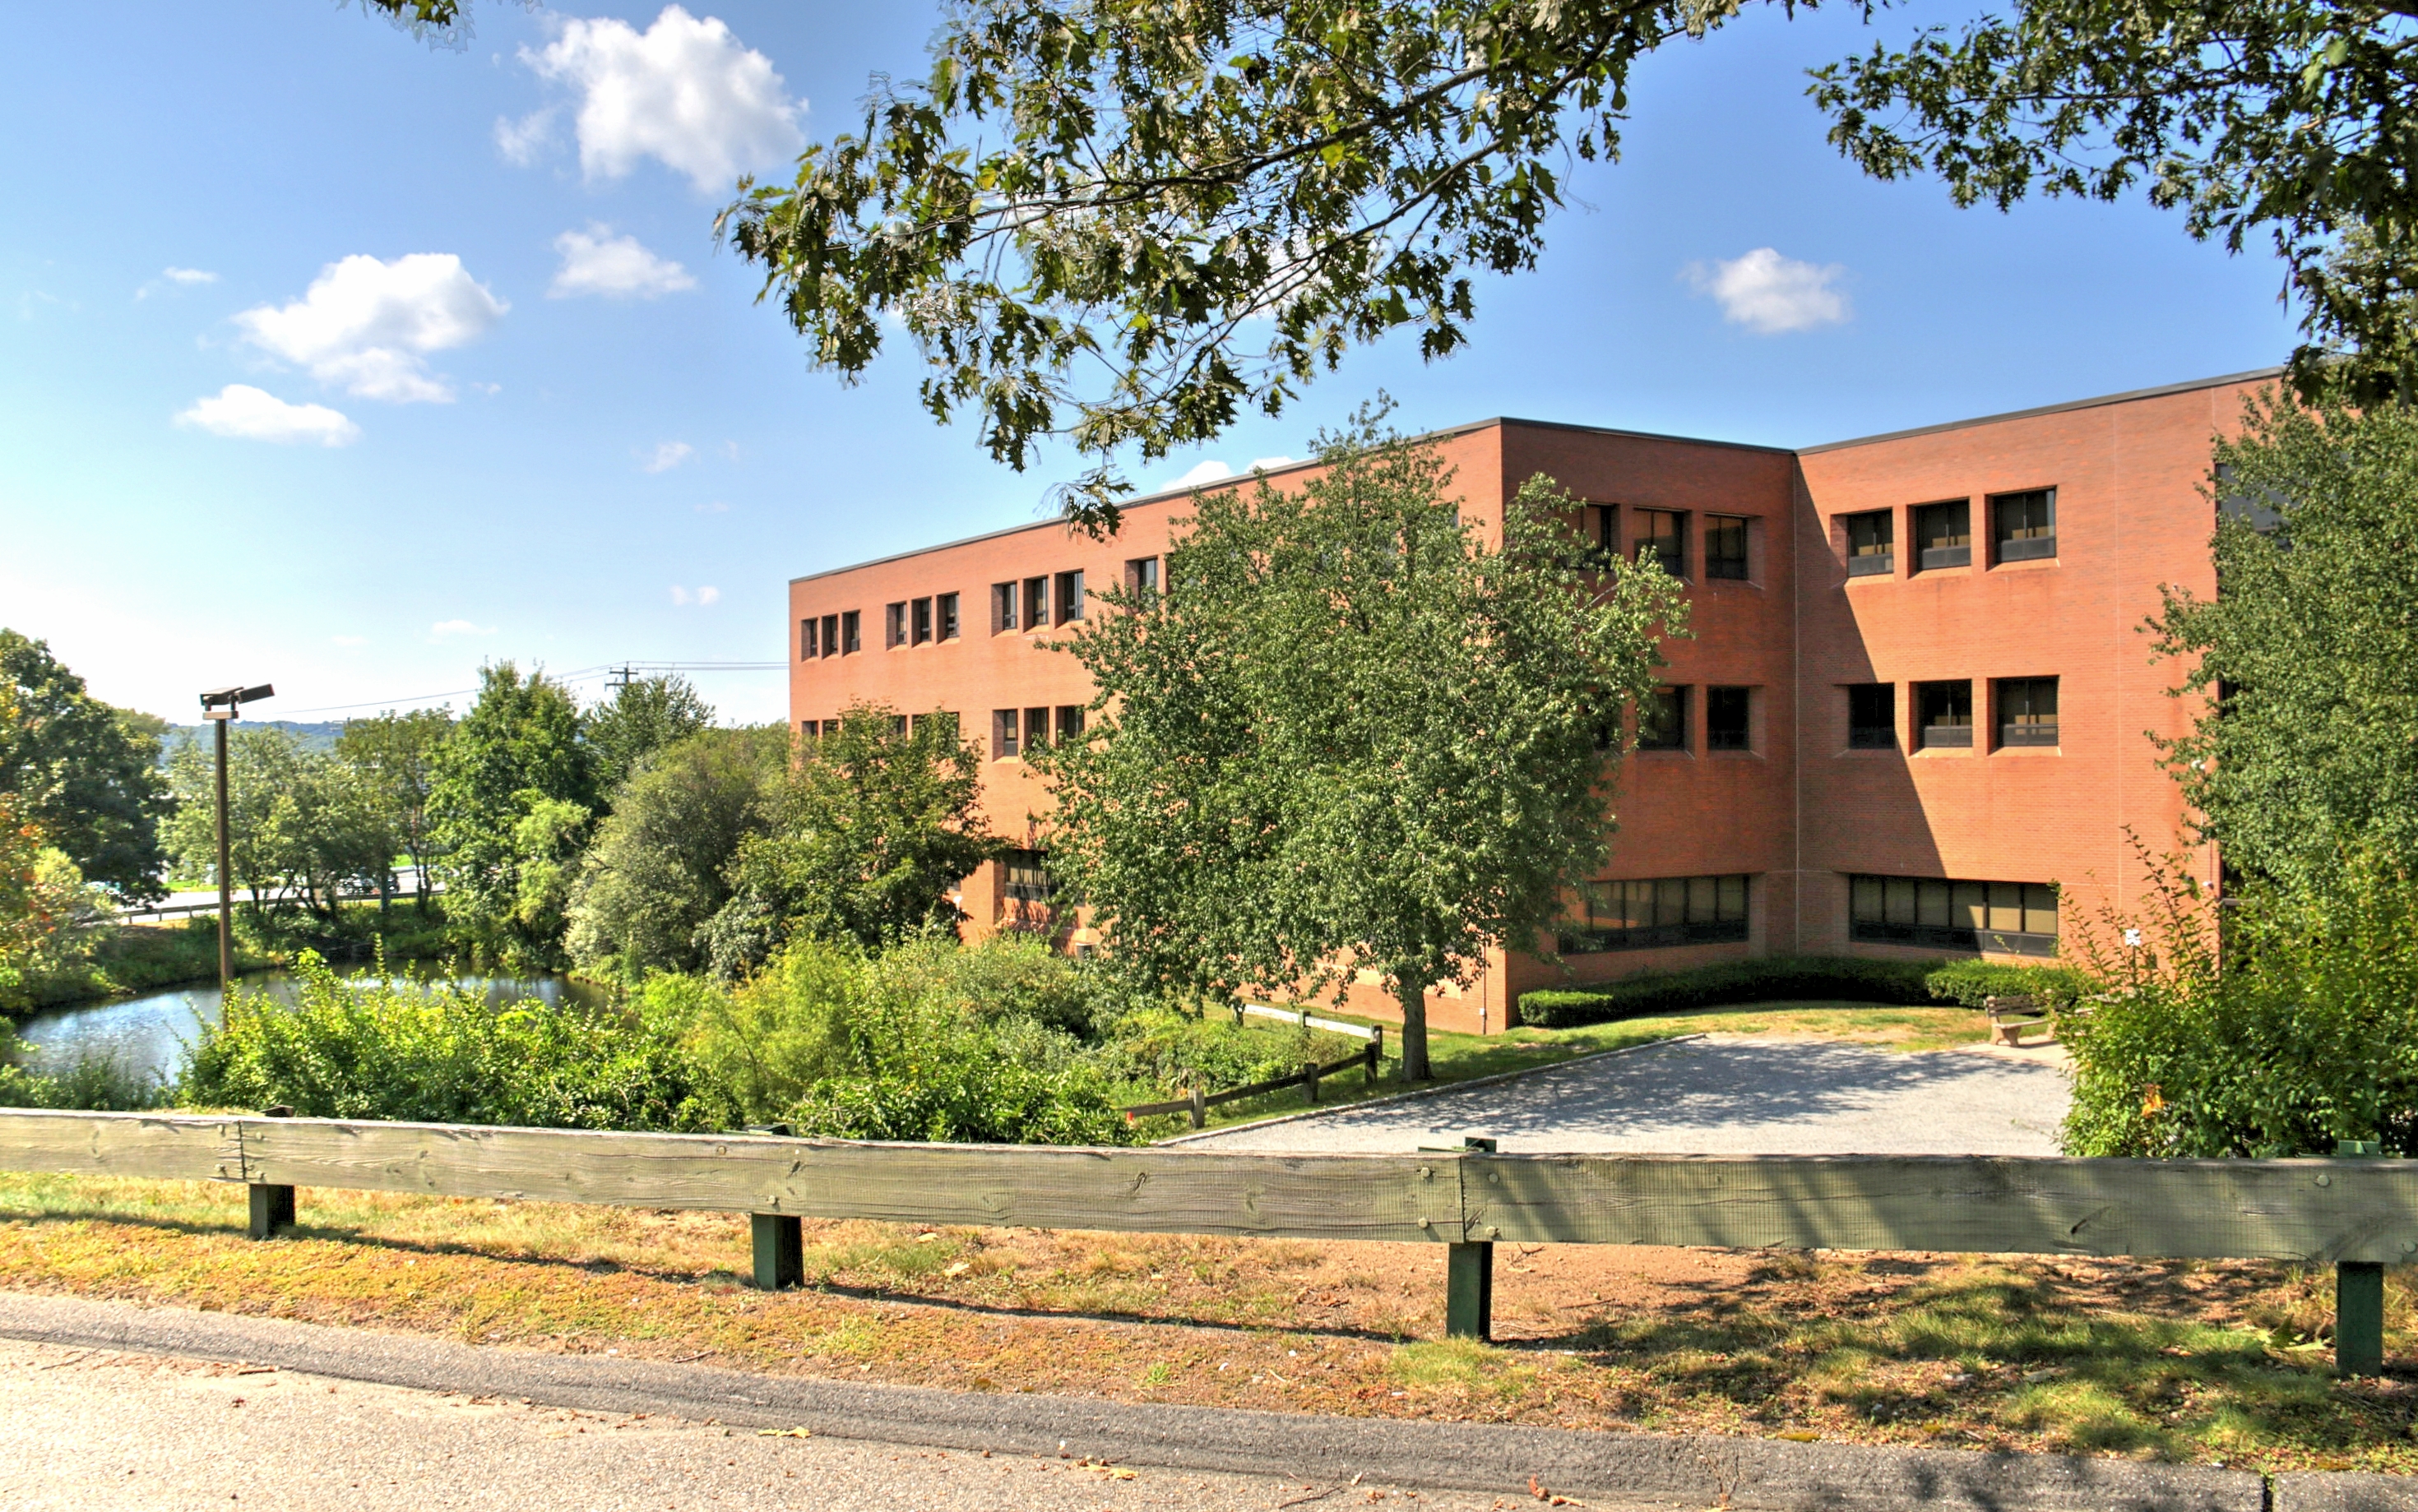 Griffin-American Healthcare REIT IV Buys Connecticut Medical Office Building Portfolio